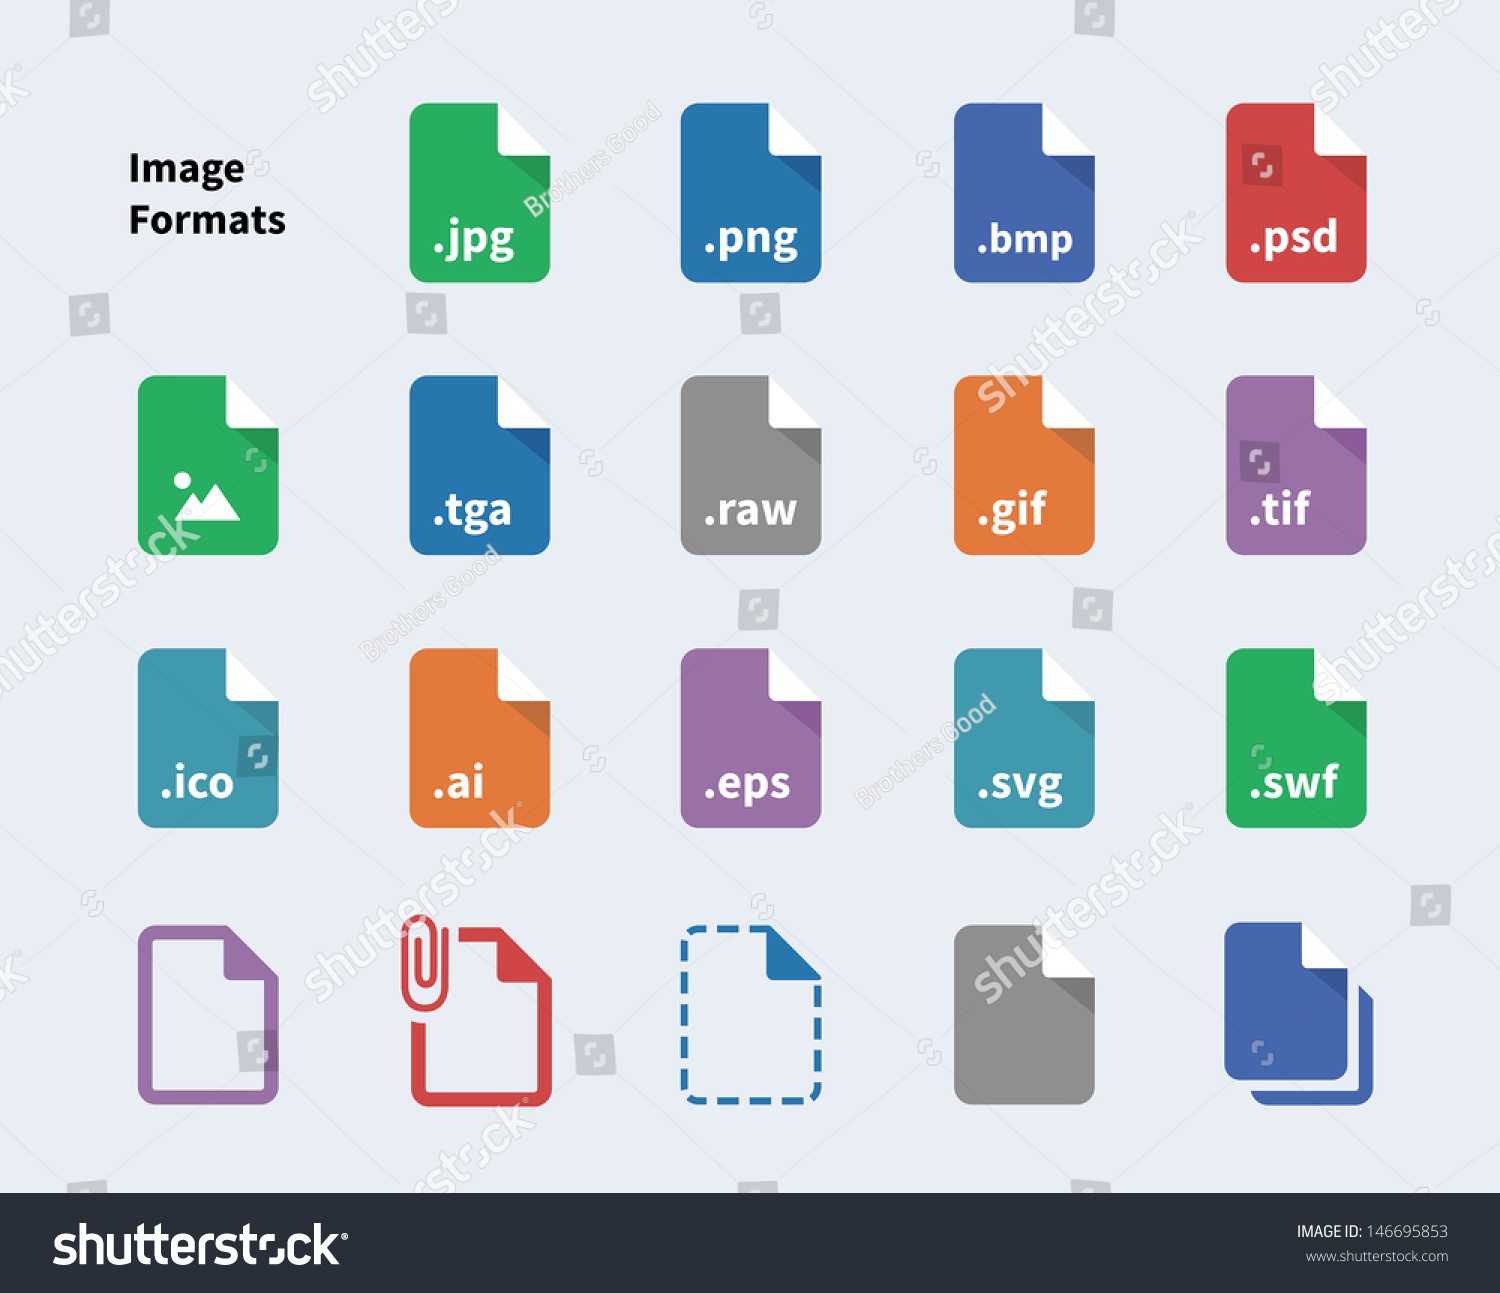 372 Ico file type Images, Stock Photos & Vectors | Shutterstock